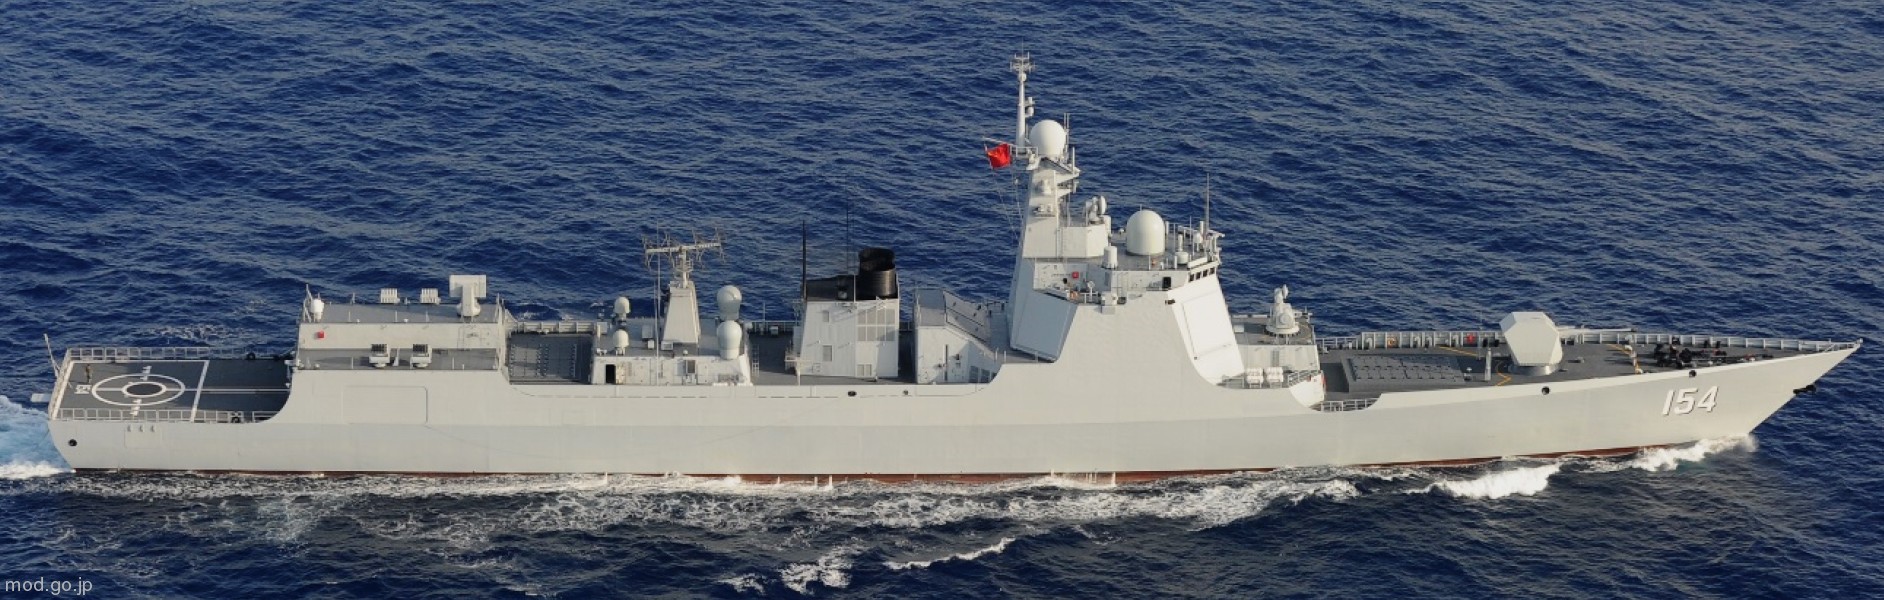 ddg-154 plans xiamen type 052d luyang class guided missile destroyer ddg china people's liberation army navy 02